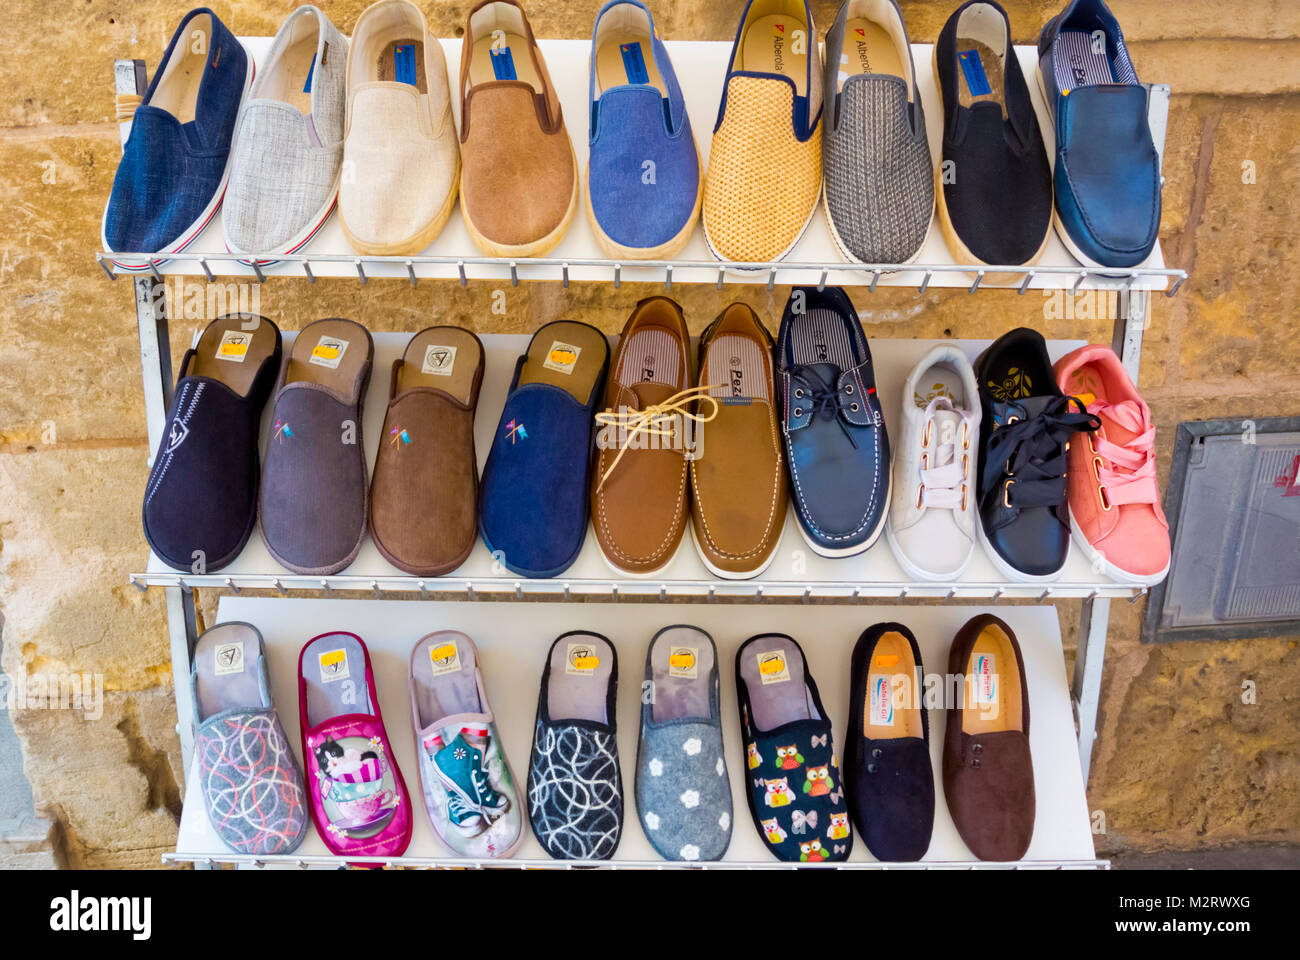 Shoes, Carrer del Moll, old town, Alcudia, Mallorca, Balearic islands,  Spain Stock Photo - Alamy